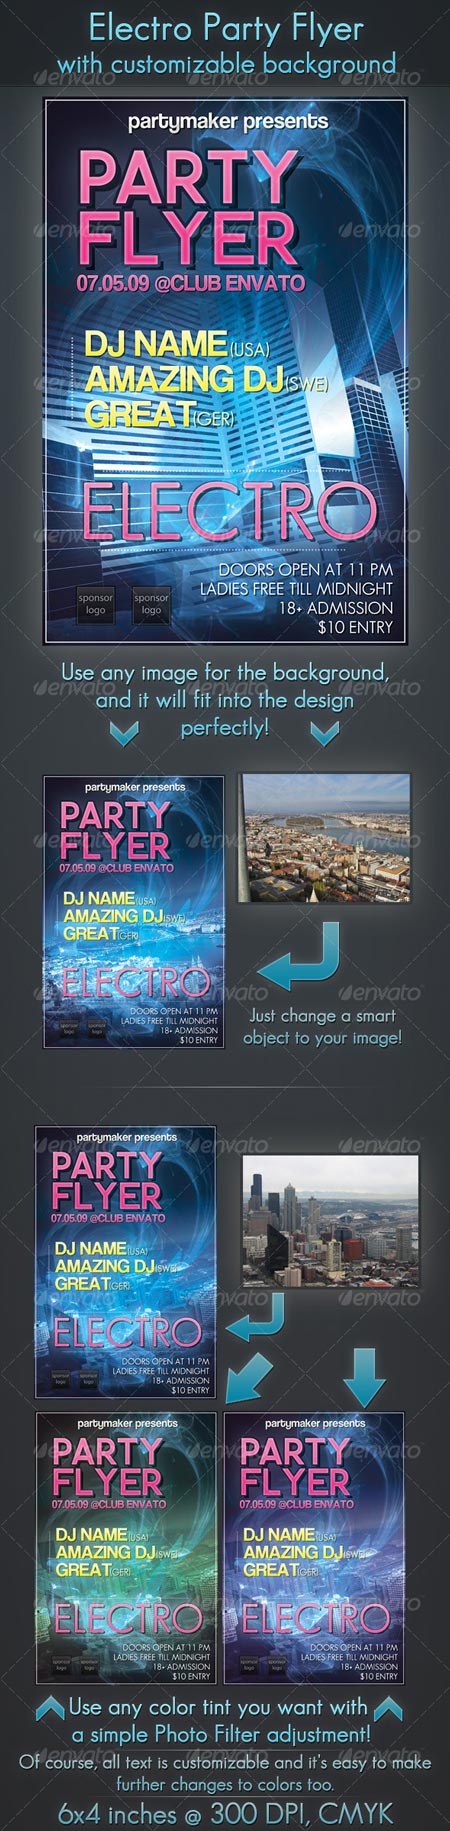 GraphicRiver Electro Party Flyer with Customizable Background 125856